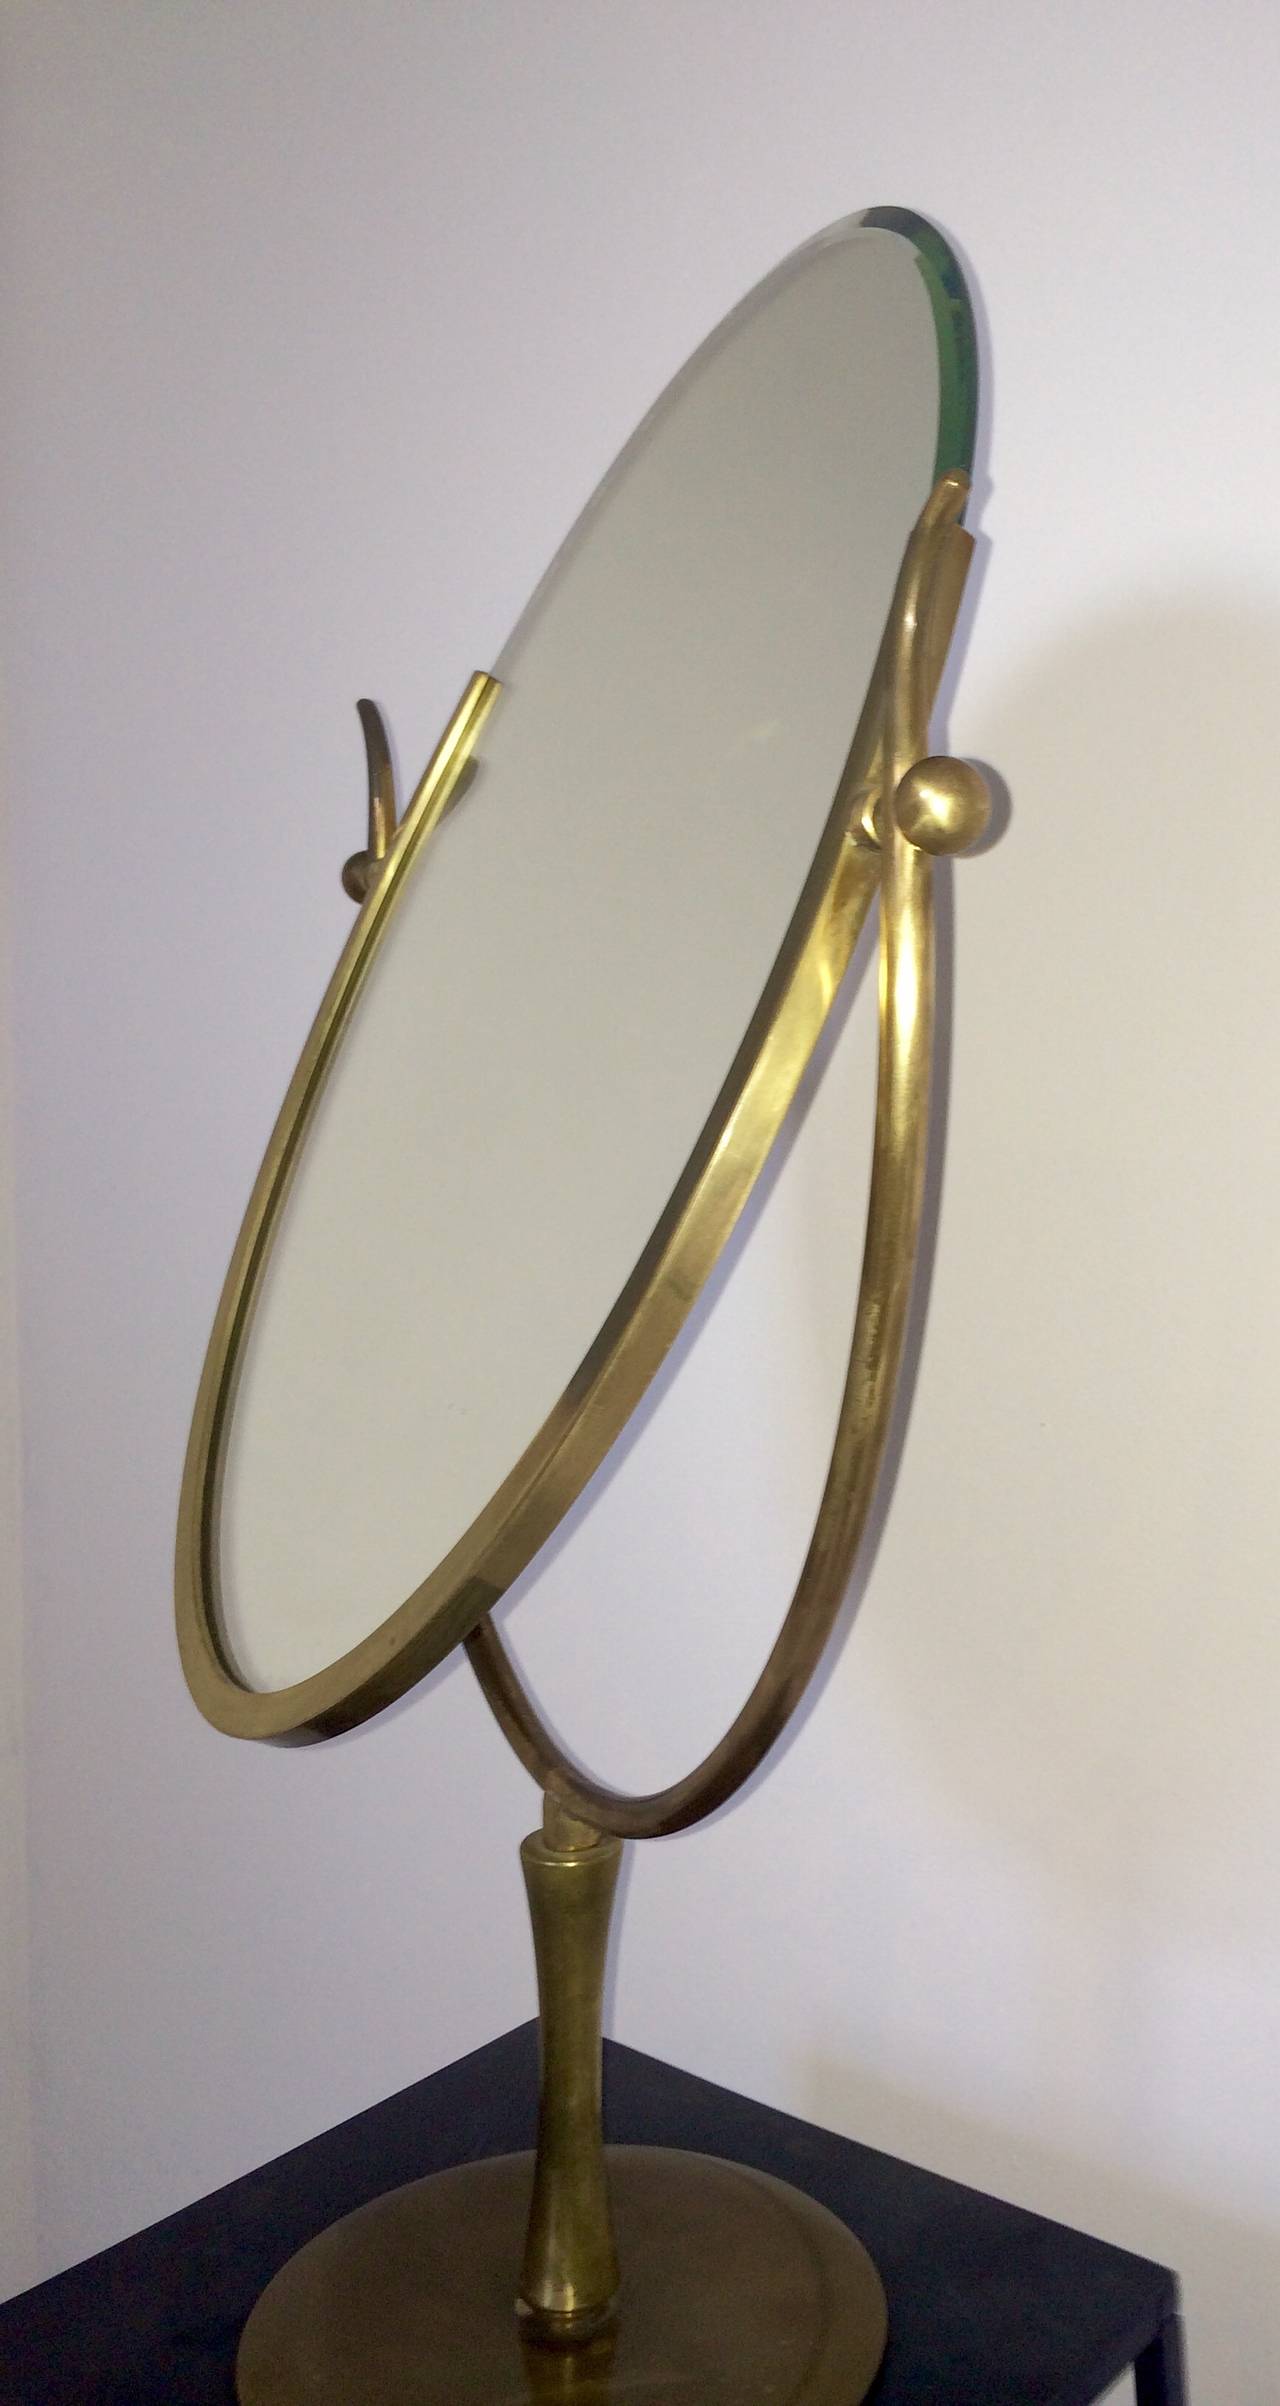 Elegant bronze table-mirror with adjustable swivel.  American, 1950s. Base diameter is 8.25 inches.